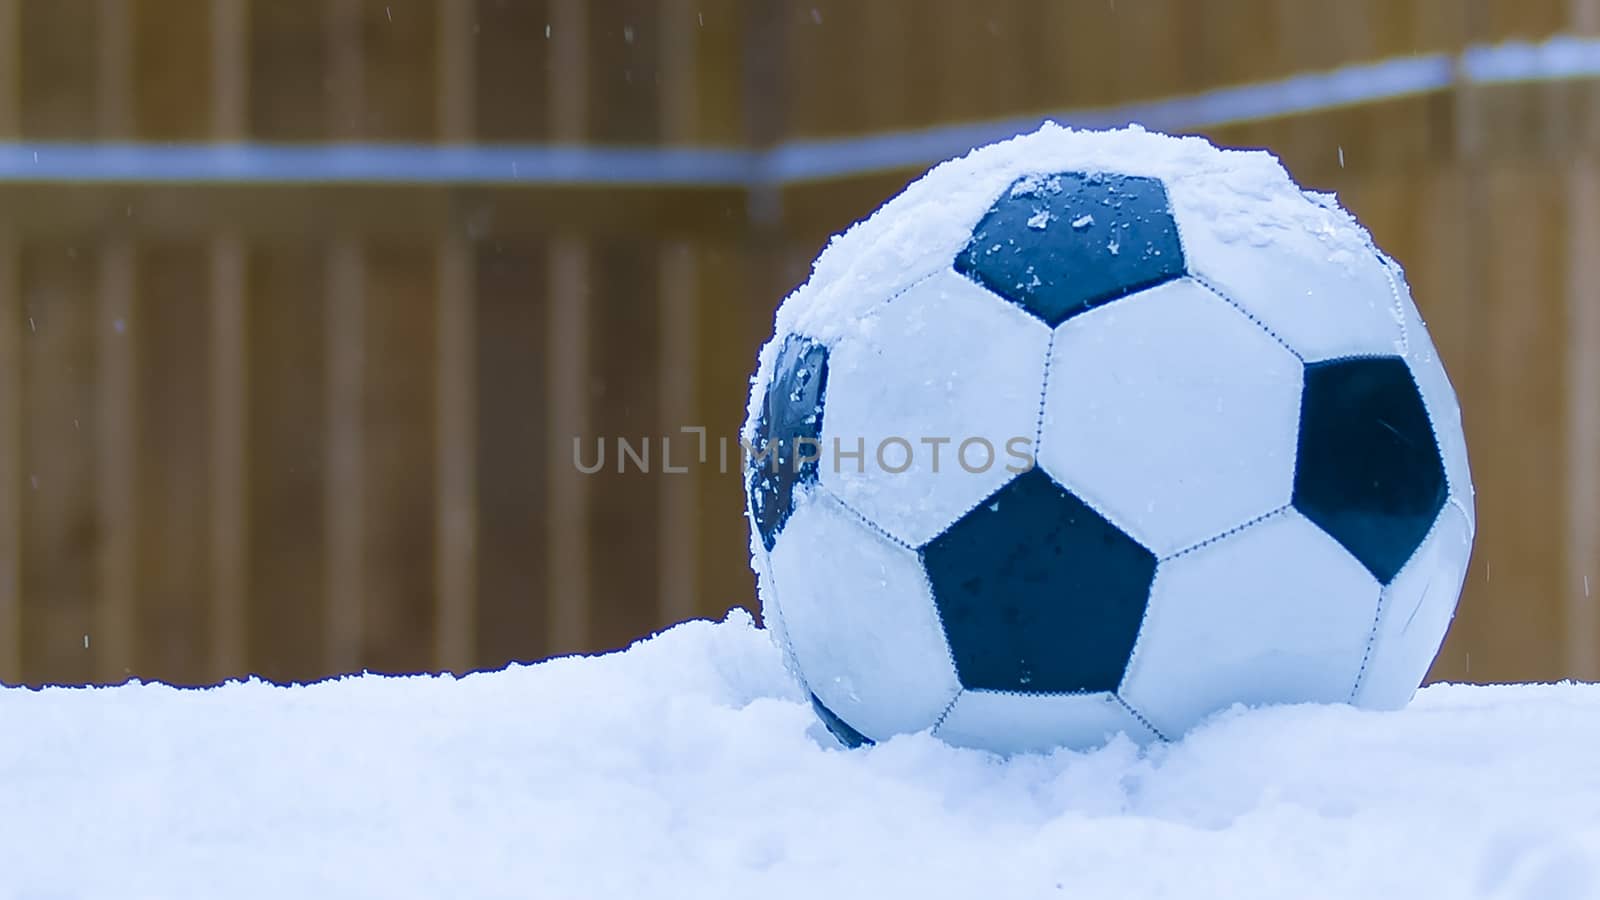 Football on snow during a winter snow storm with a wooden fence background